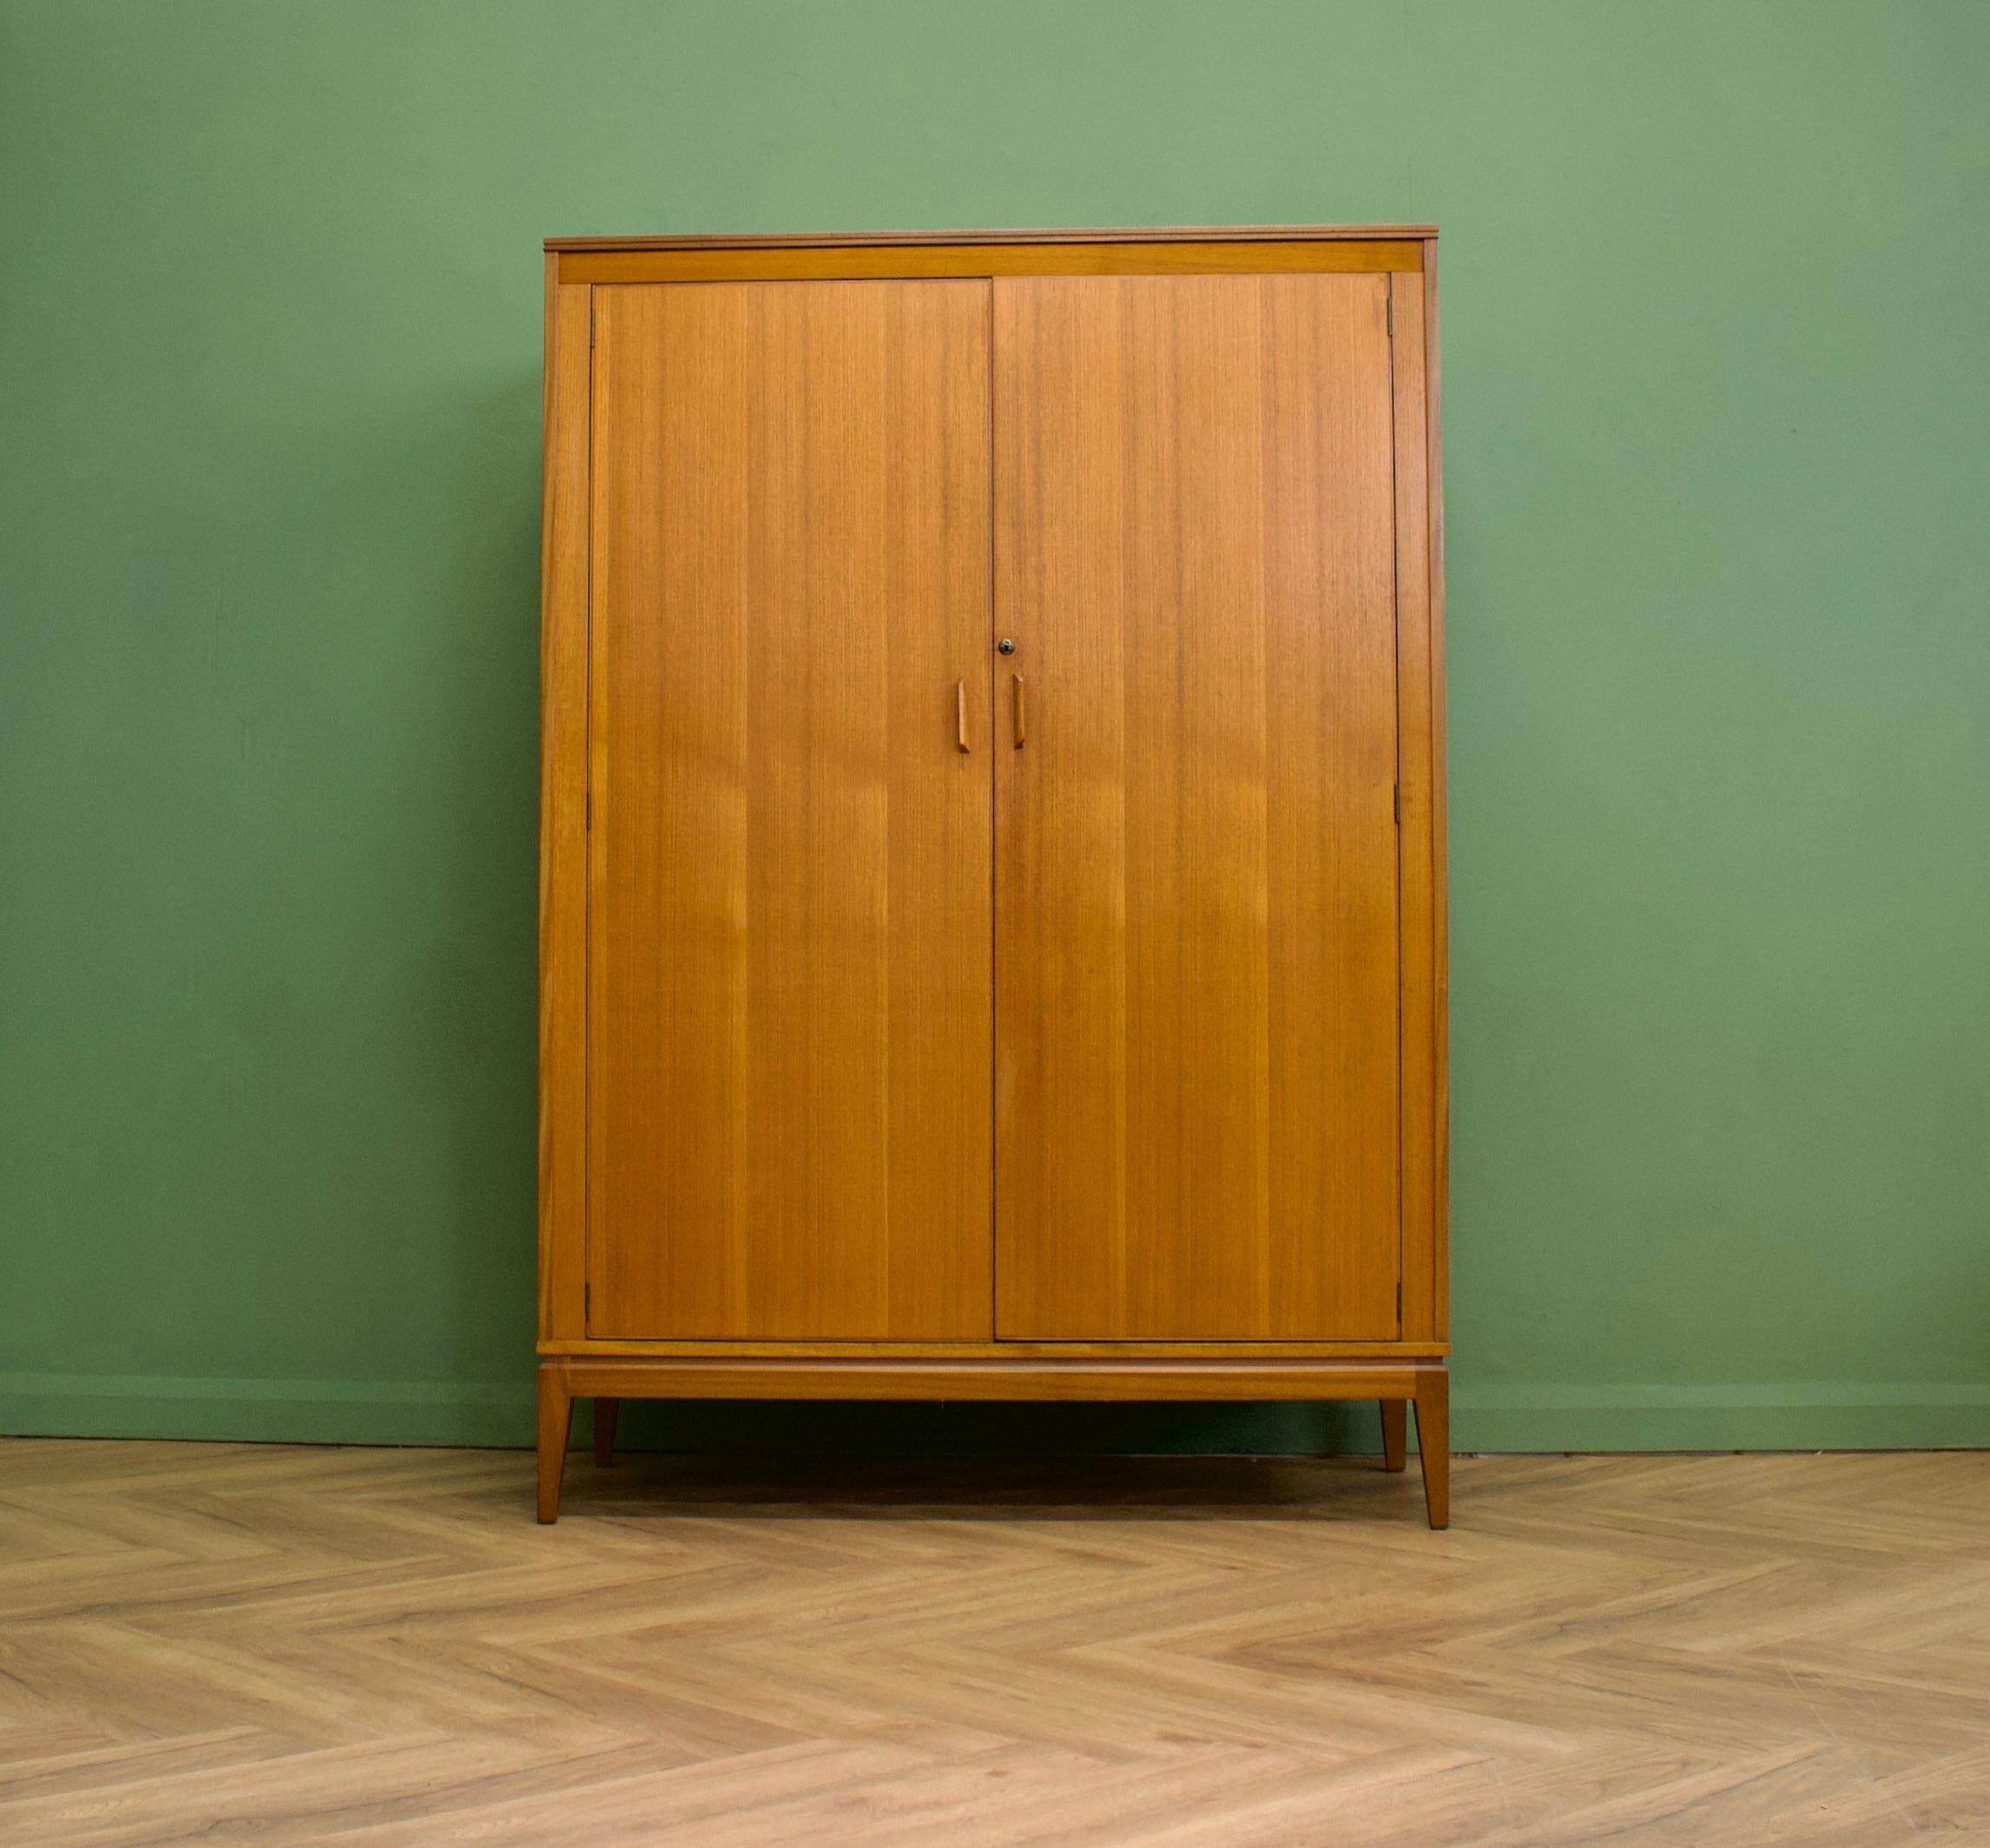 A walnut freestanding wardrobe by Alfred Cox - these pieces were usually retailed through Heals department store during the 1950s and 1960s
Internally there are two hanging rails and a shelf
The attractive legs are slightly tapered and splayed and